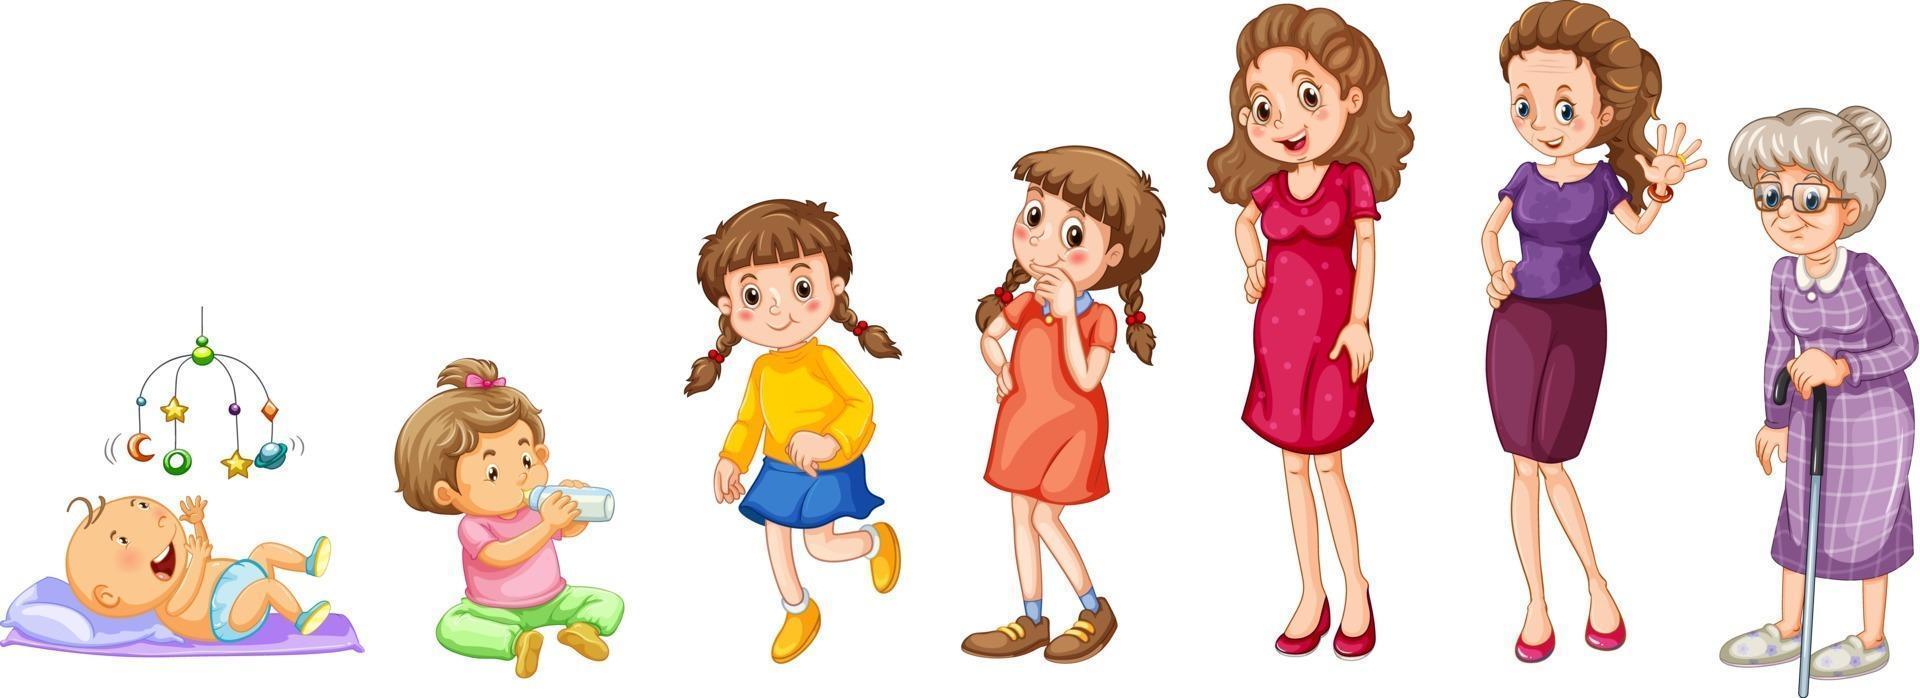 Steps of female growing up vector